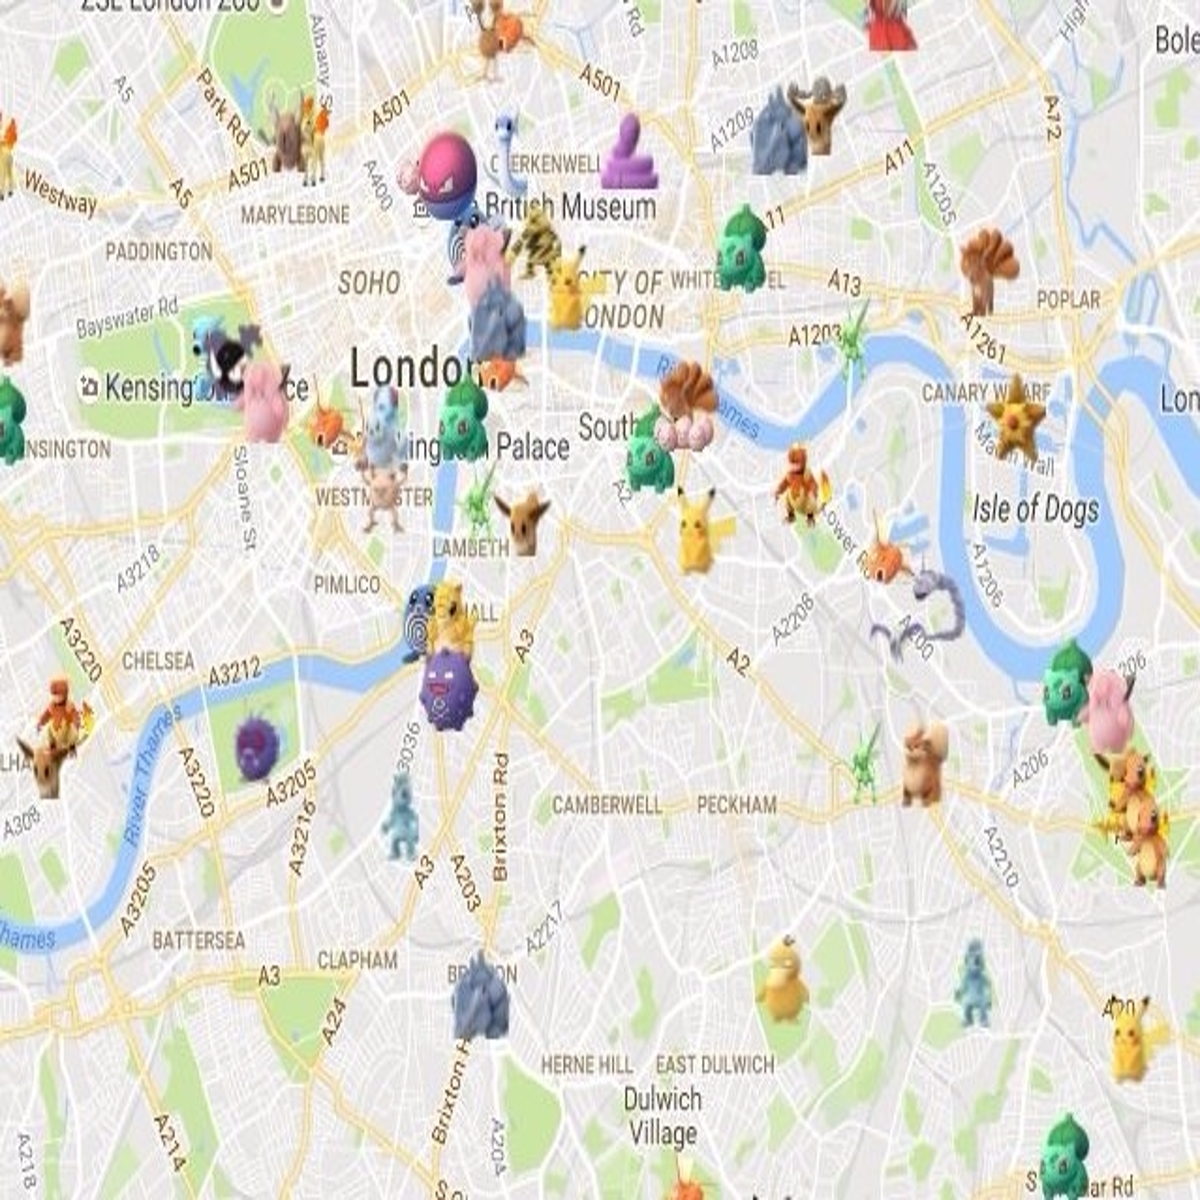 Discover the Best Pokemon Go Nests Coordinates in 2023